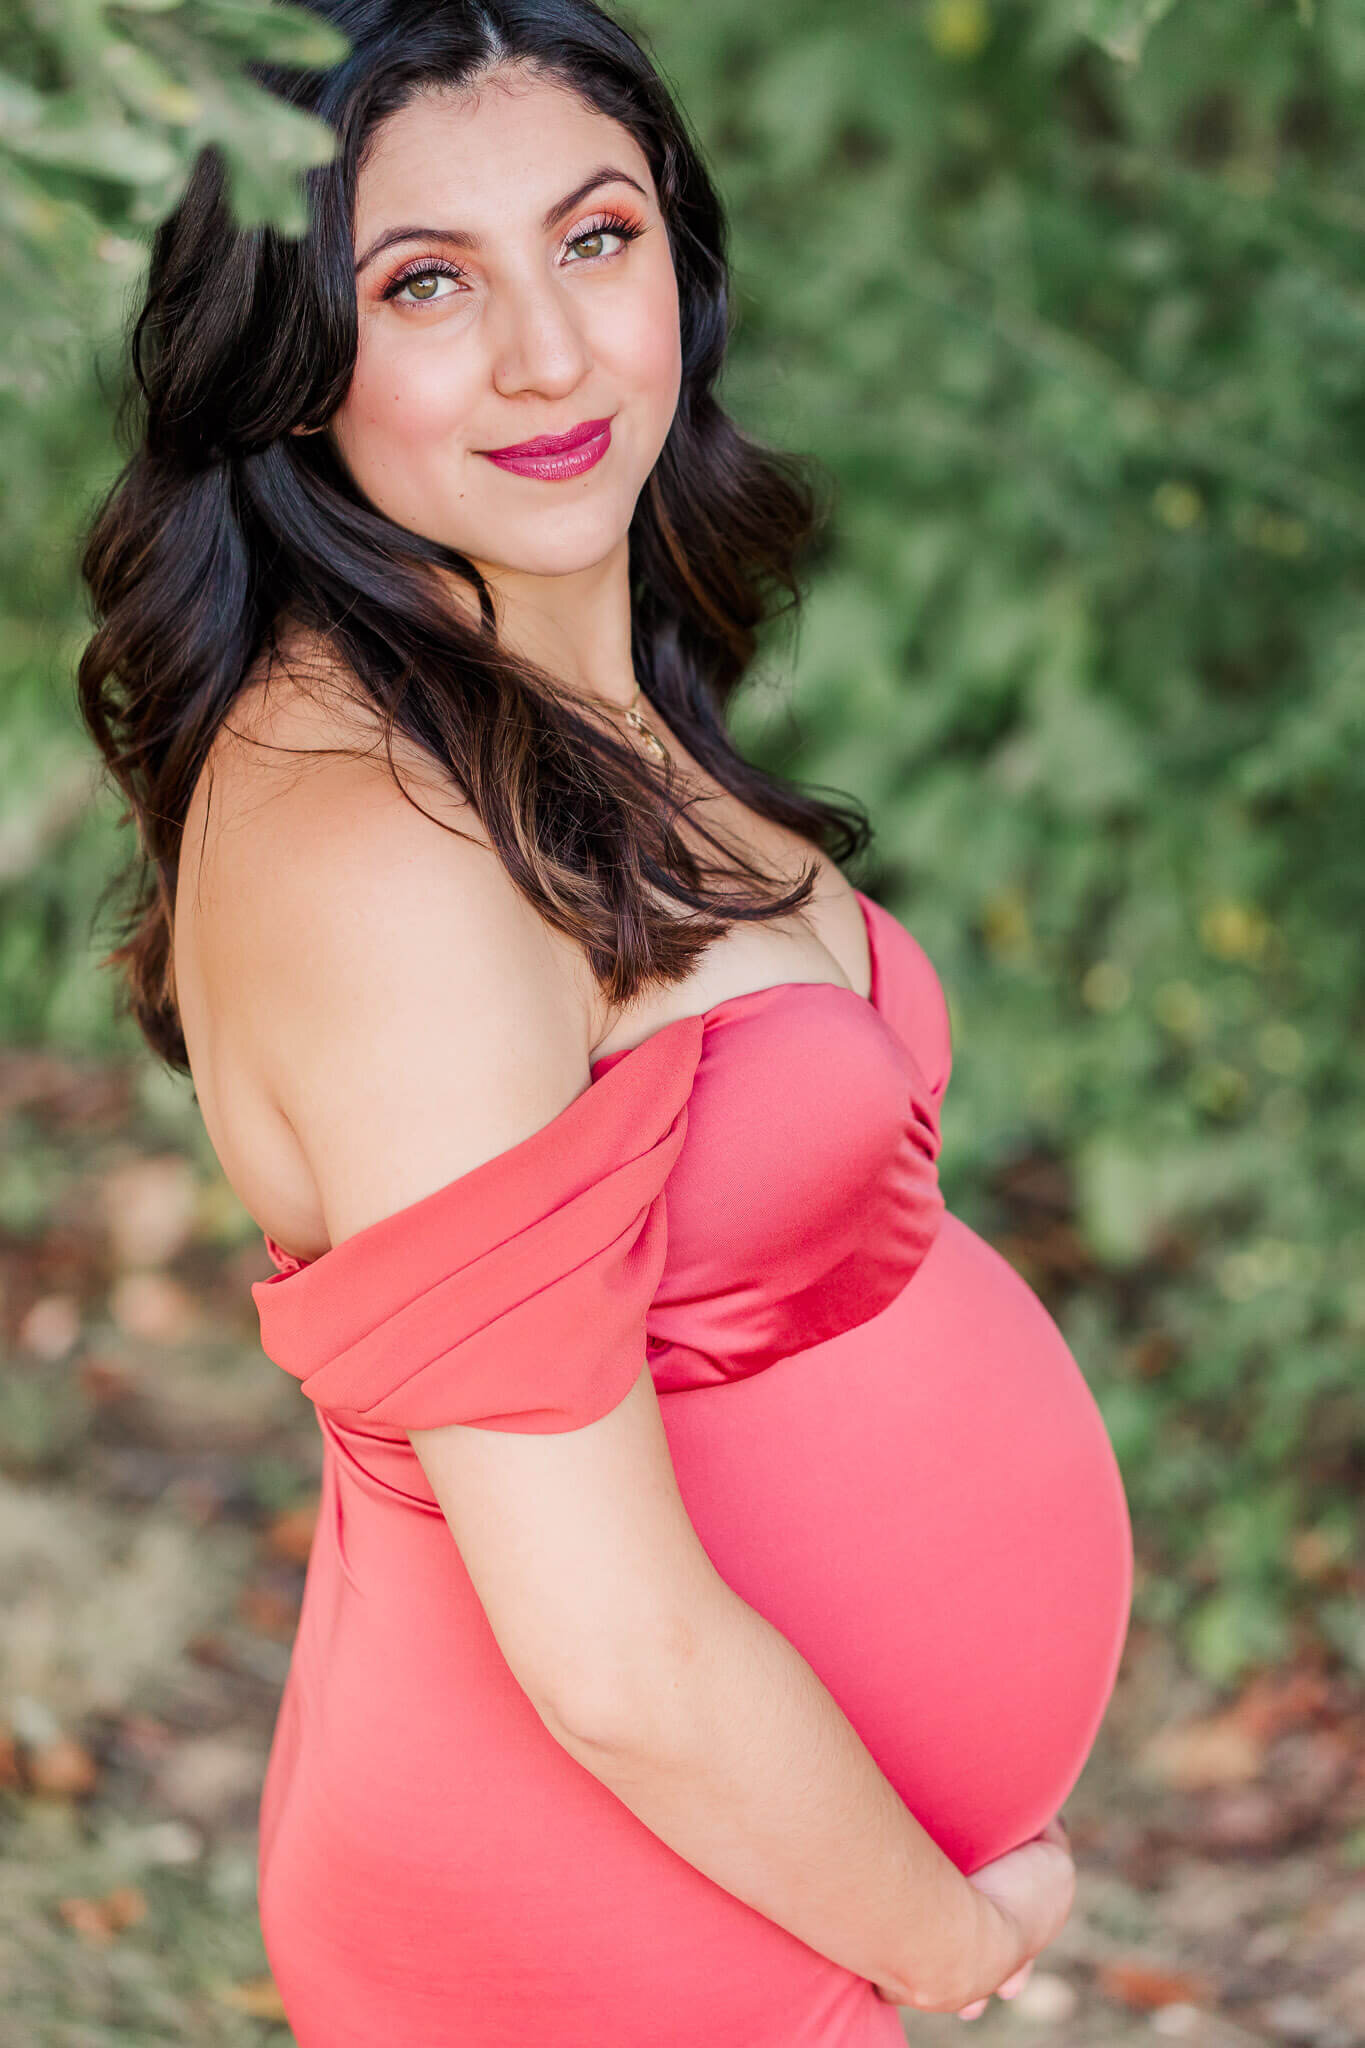 An outdoor Woodbridge maternity portrait session of a pregnant woman wearing a pink dress.